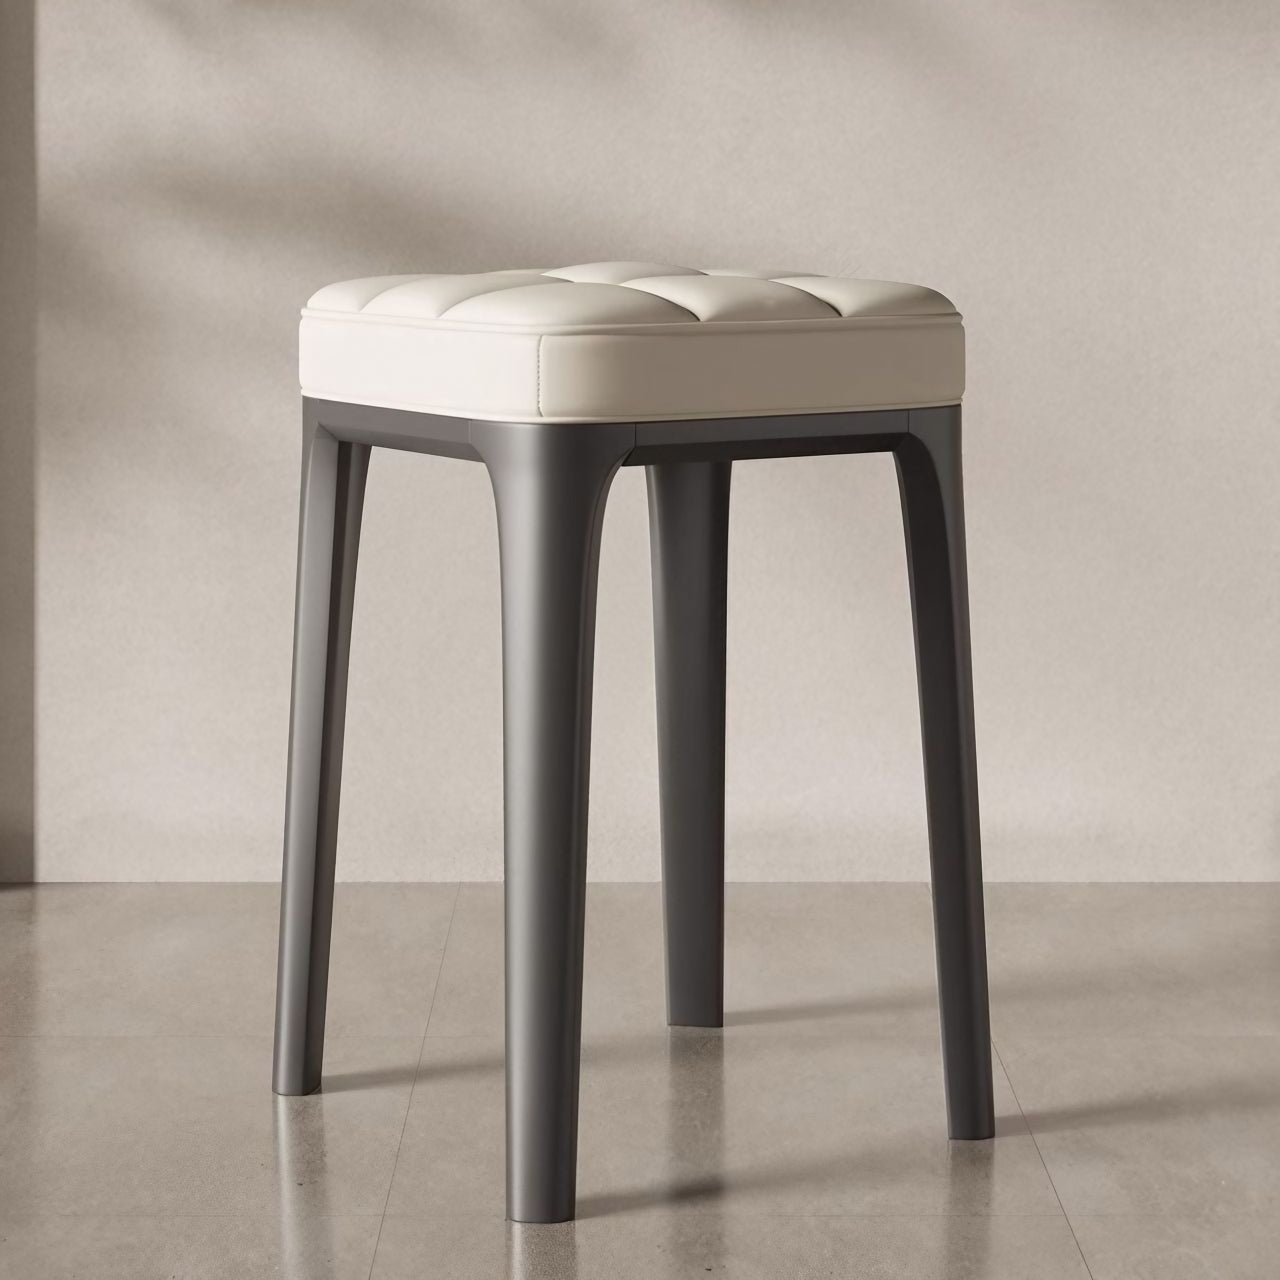 Durable Leather and Solid Wood Single Stool Chair